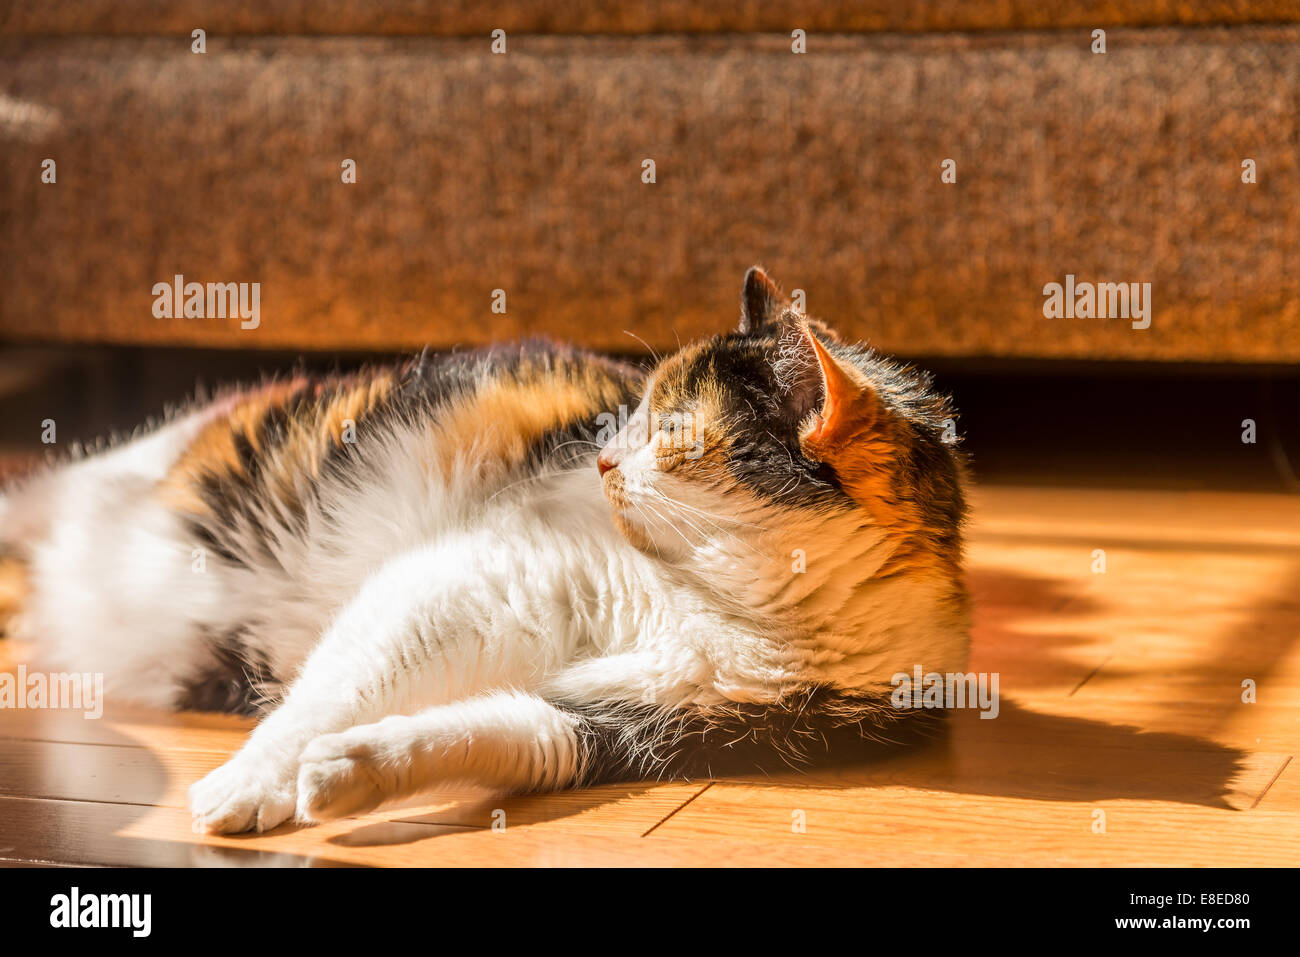 A calico cat sleeps in the sun. Stock Photo